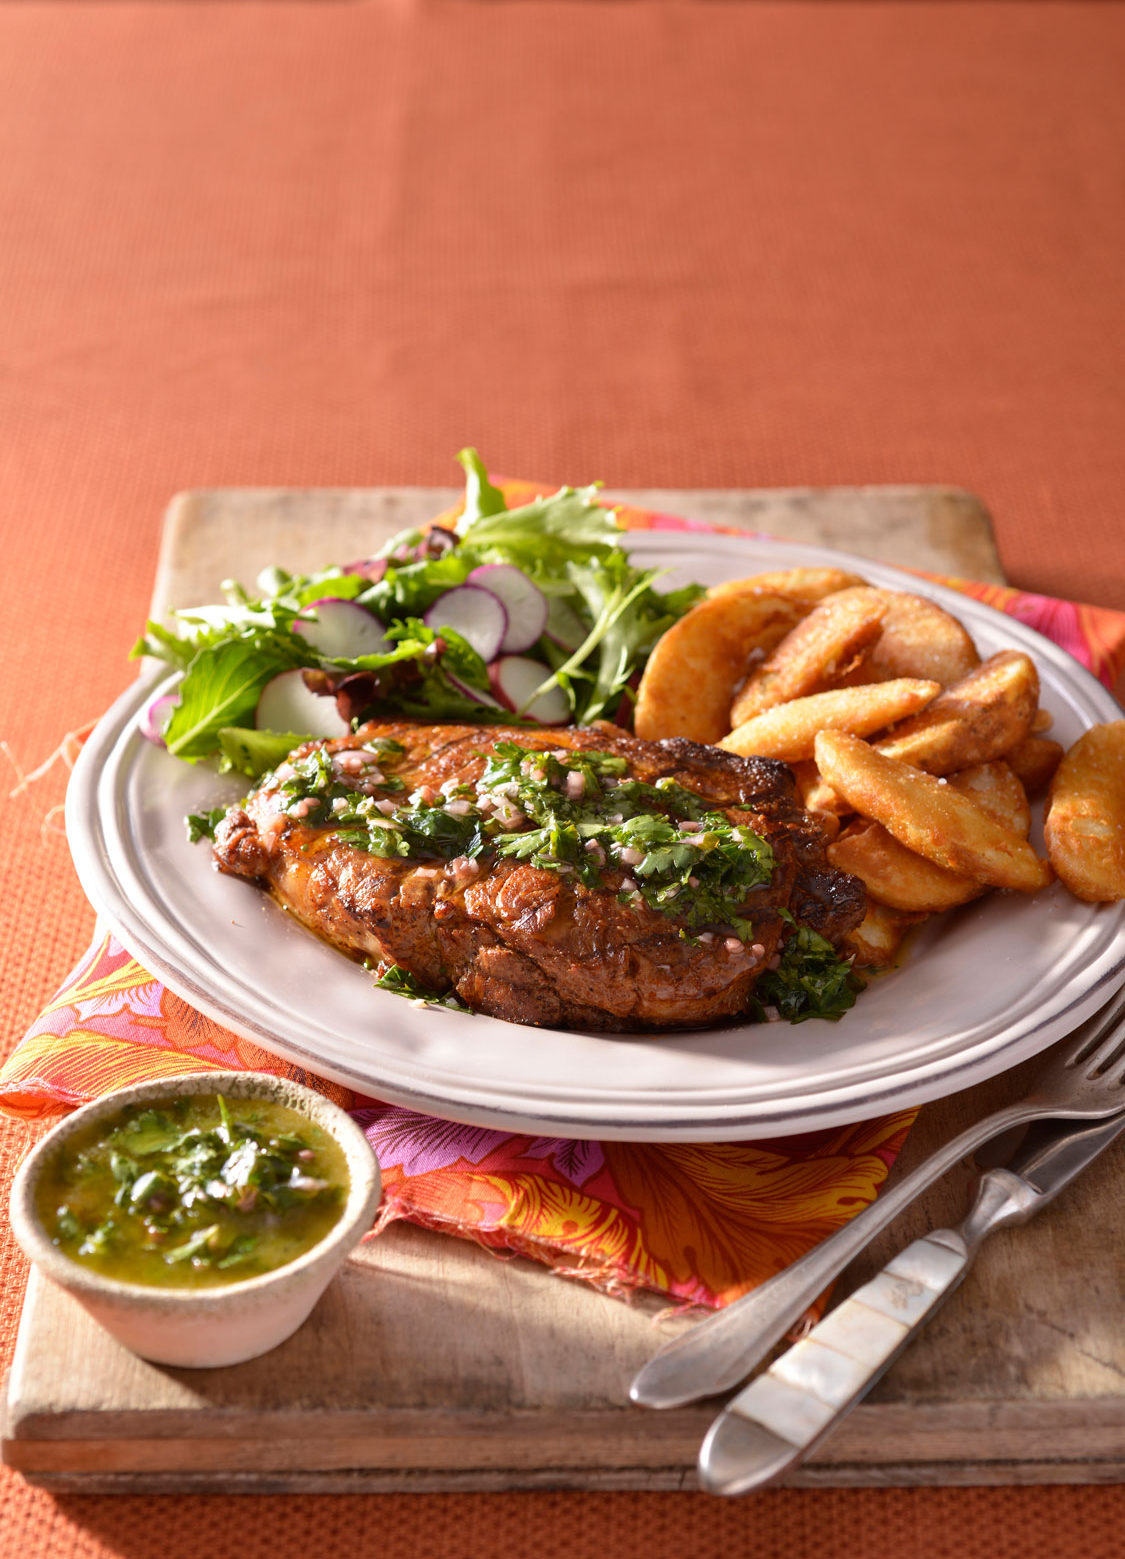 GRILLED STEAKS WITH CHIMICHURRI SAUCE